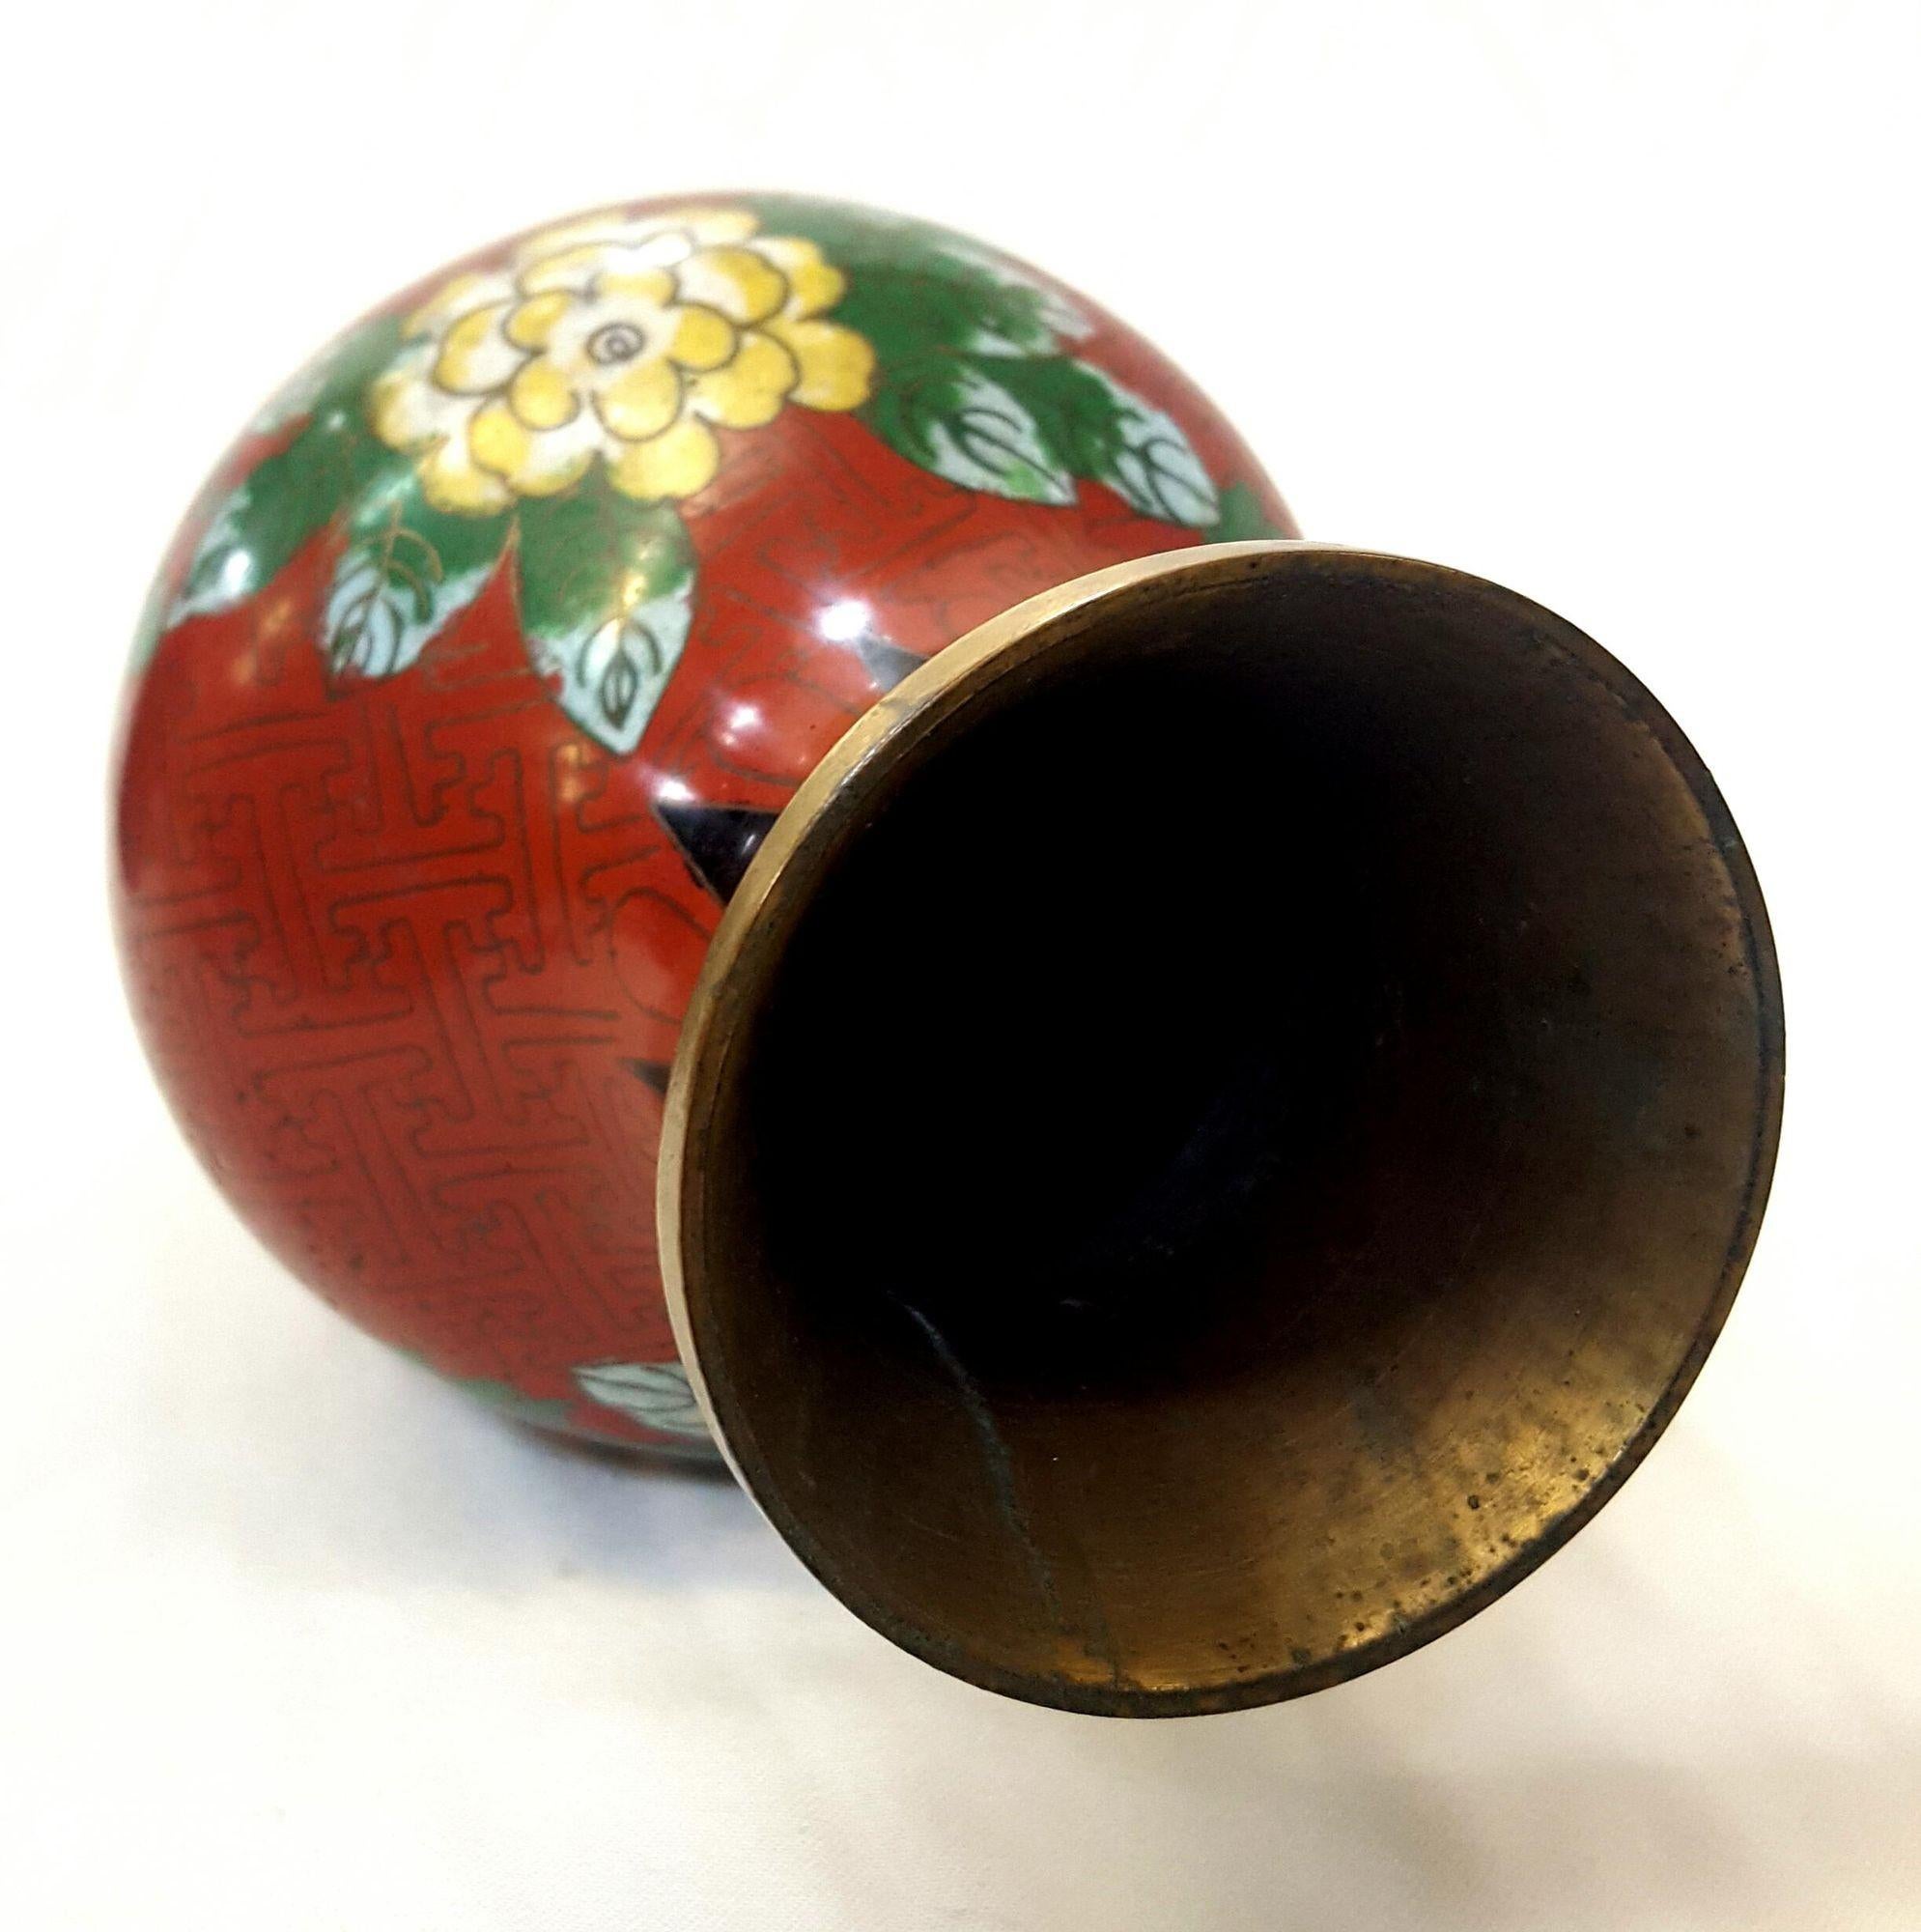 Vintage Chinese Floral Champleve Vase Enamel-Over-Brass In Excellent Condition For Sale In Van Nuys, CA